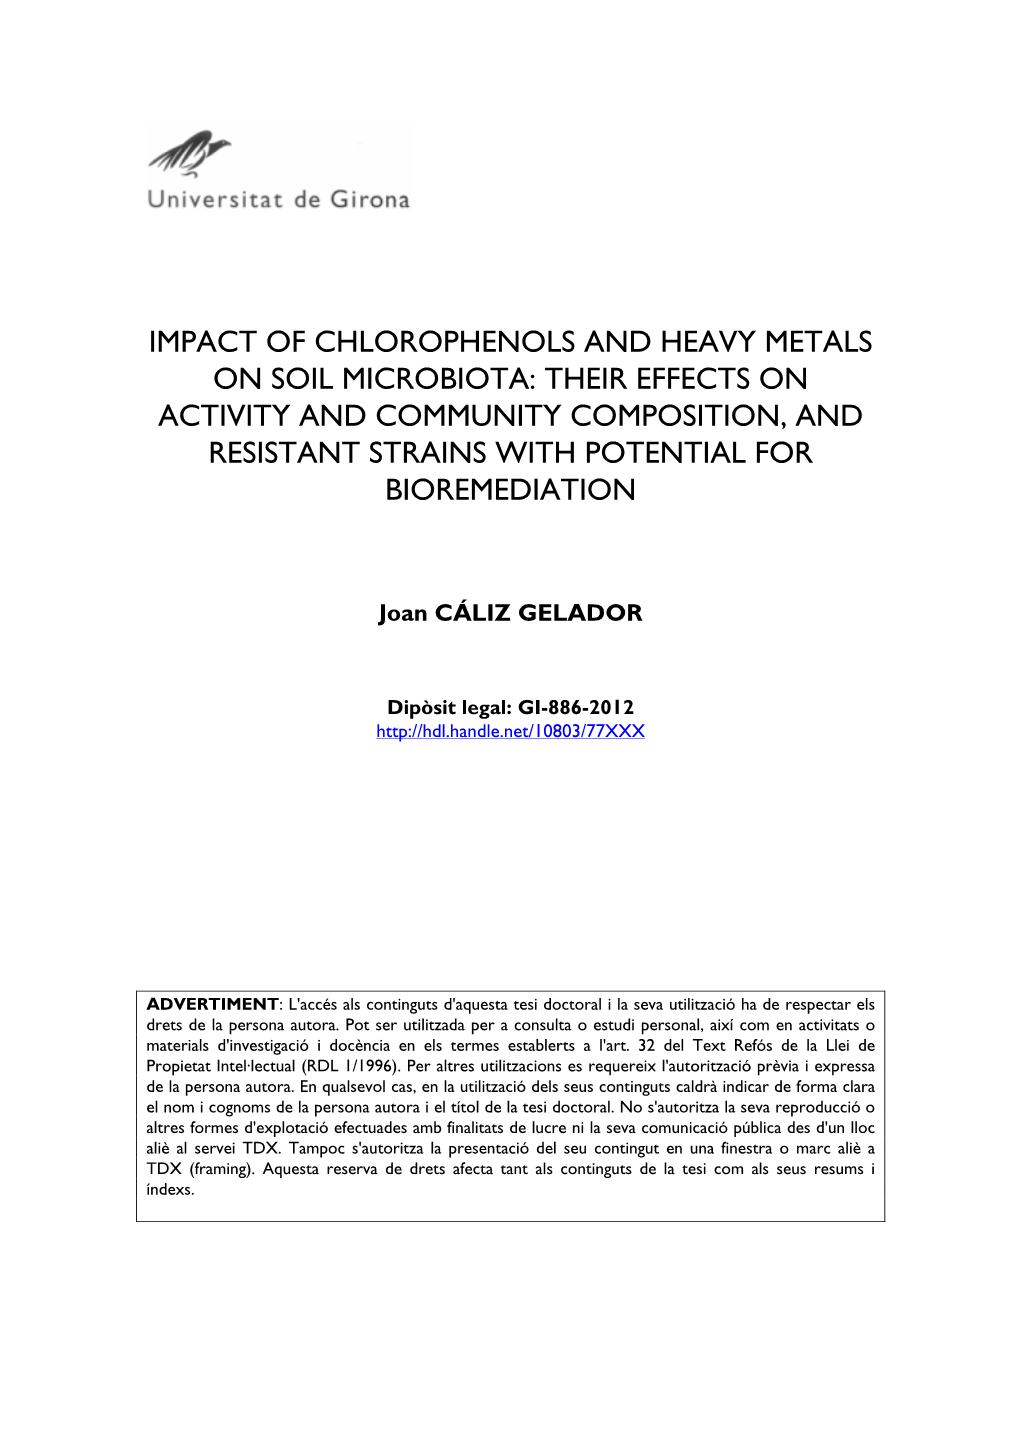 Impact of Chlorophenols and Heavy Metals